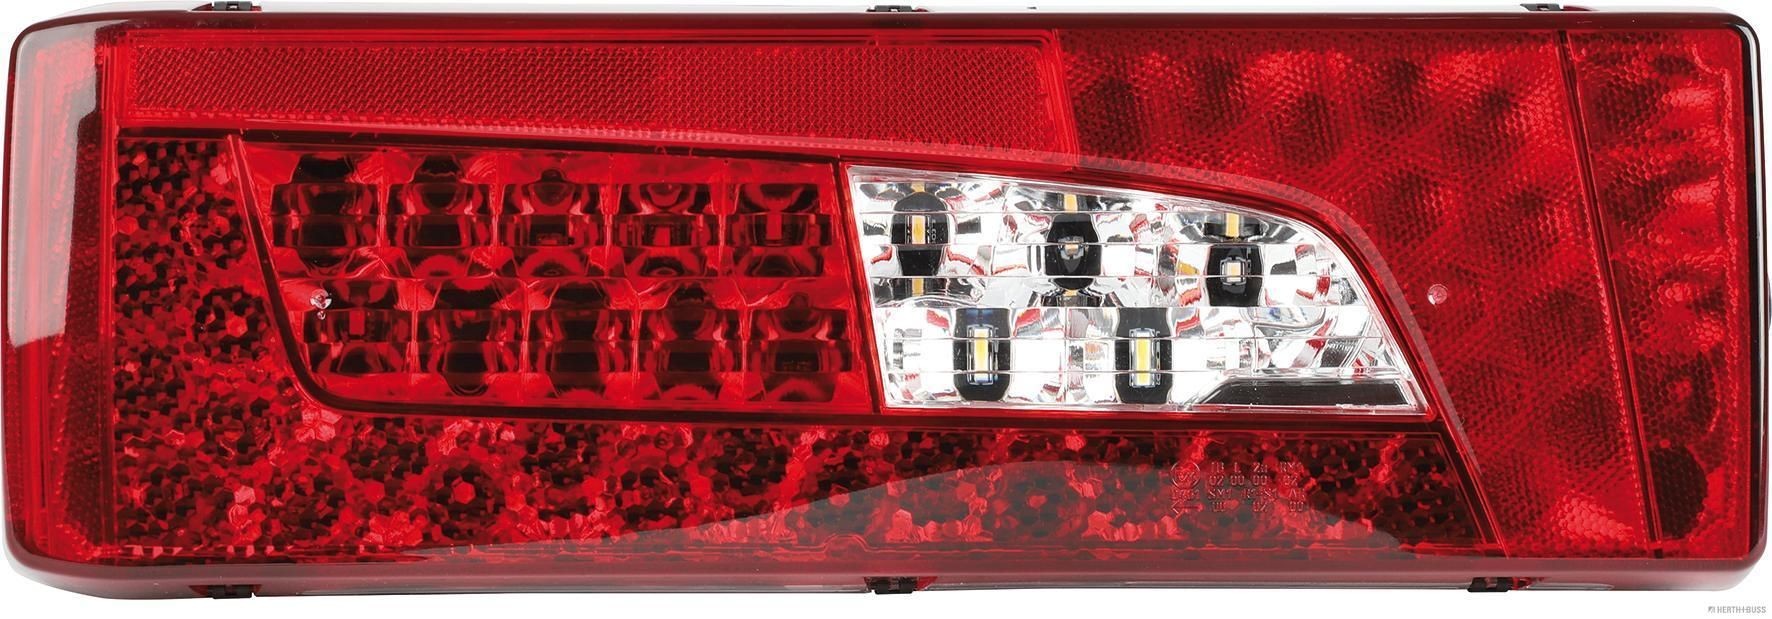 HERTH+BUSS ELPARTS 83840590 Taillight 2 380 955